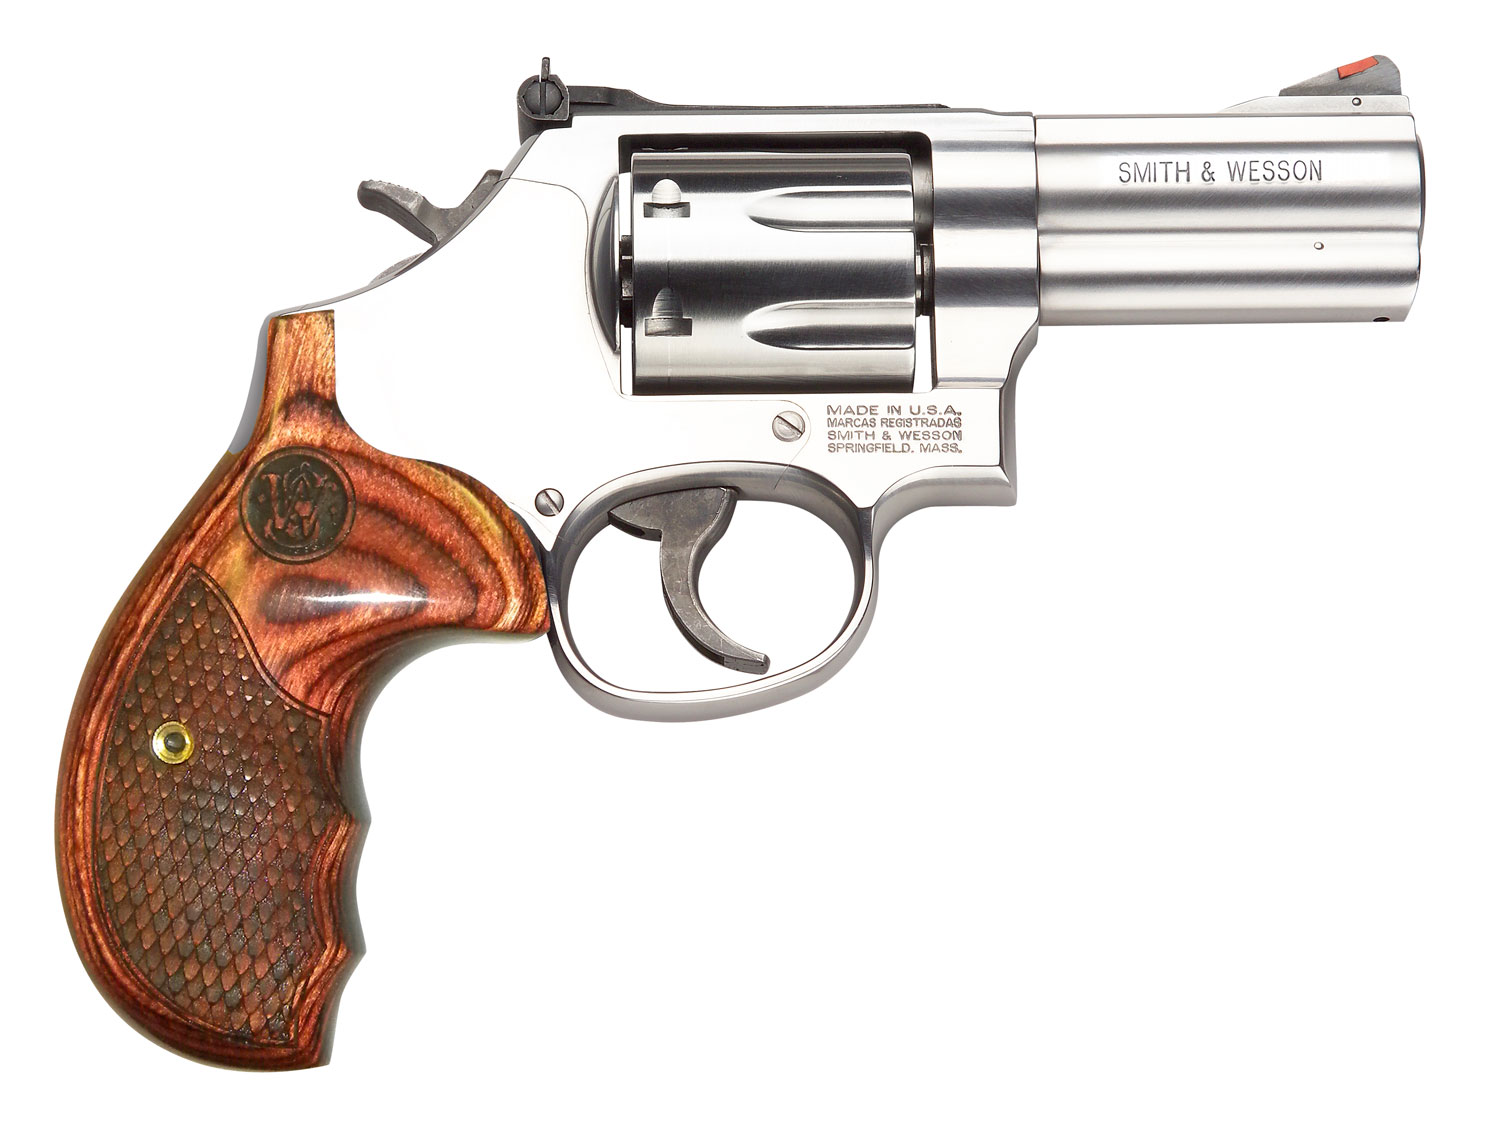 Smith & Wesson 150713 Model 686 Plus Deluxe 357 Mag or 38 S&W Spl +P Stainless Steel 3